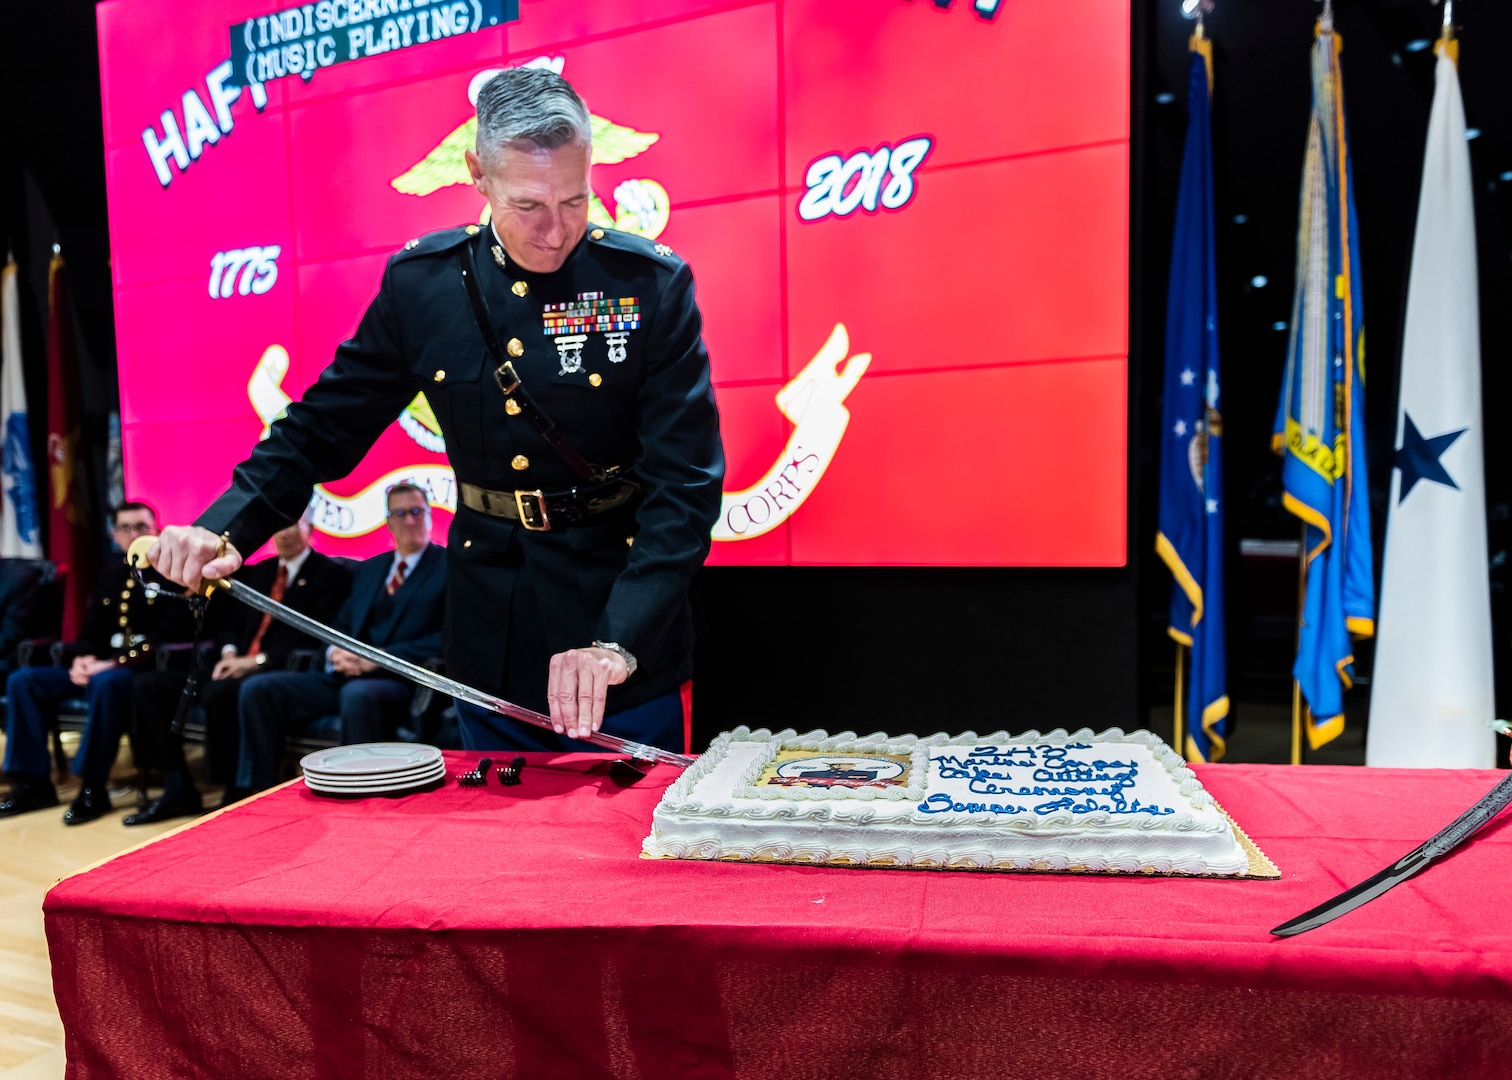 A Marine on a stage prepares to cut a birthday cake on a table